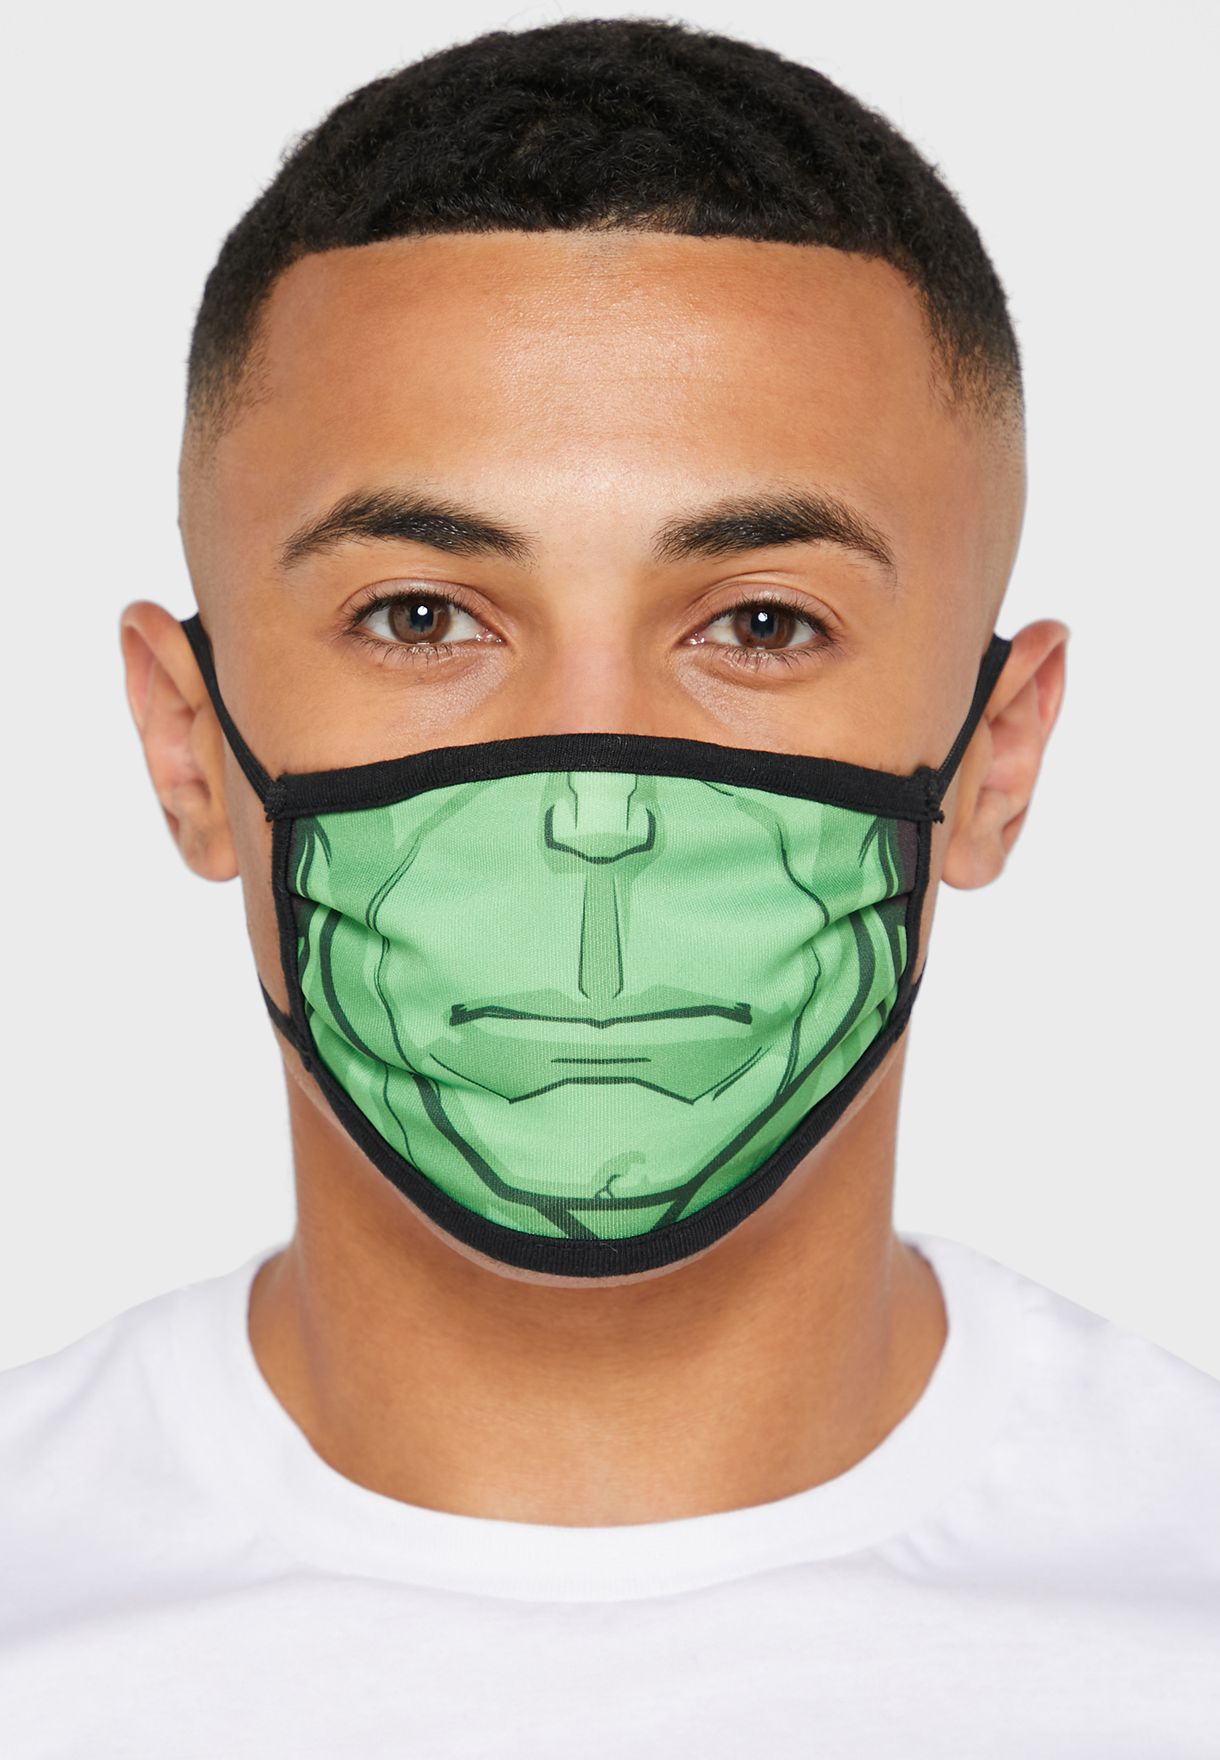 Pack of 3 Hulk Fabric Face Cover Mask